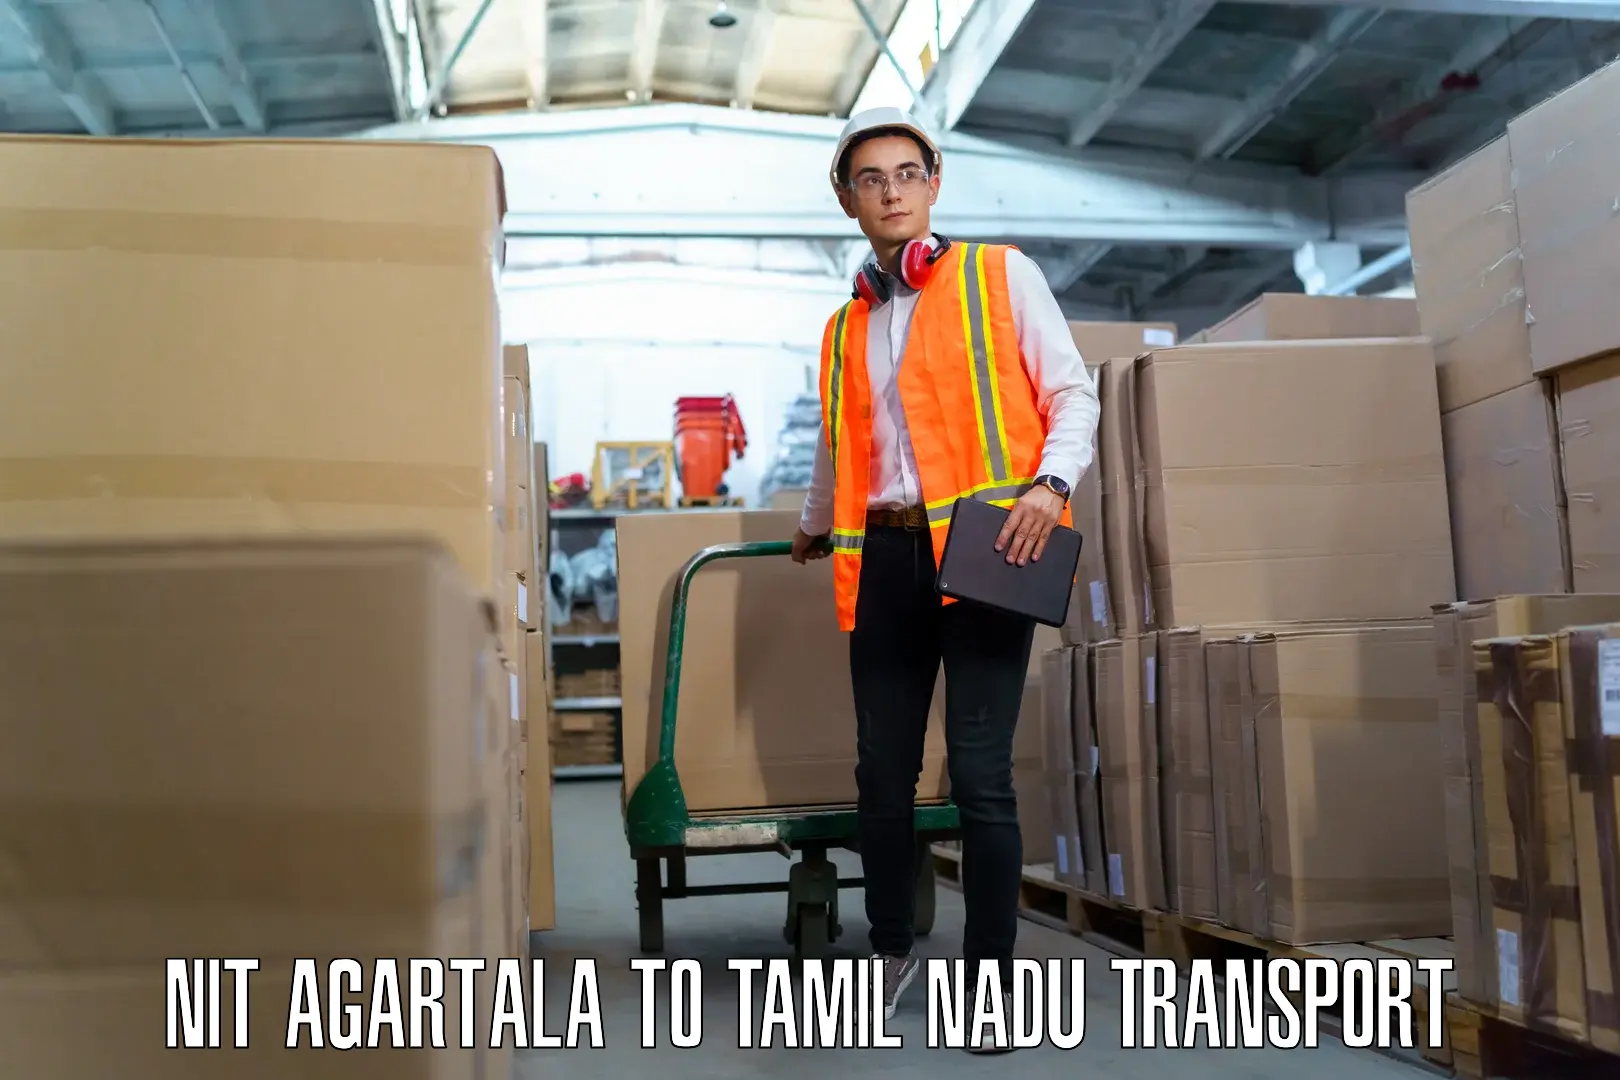 Container transport service NIT Agartala to Tamil Nadu